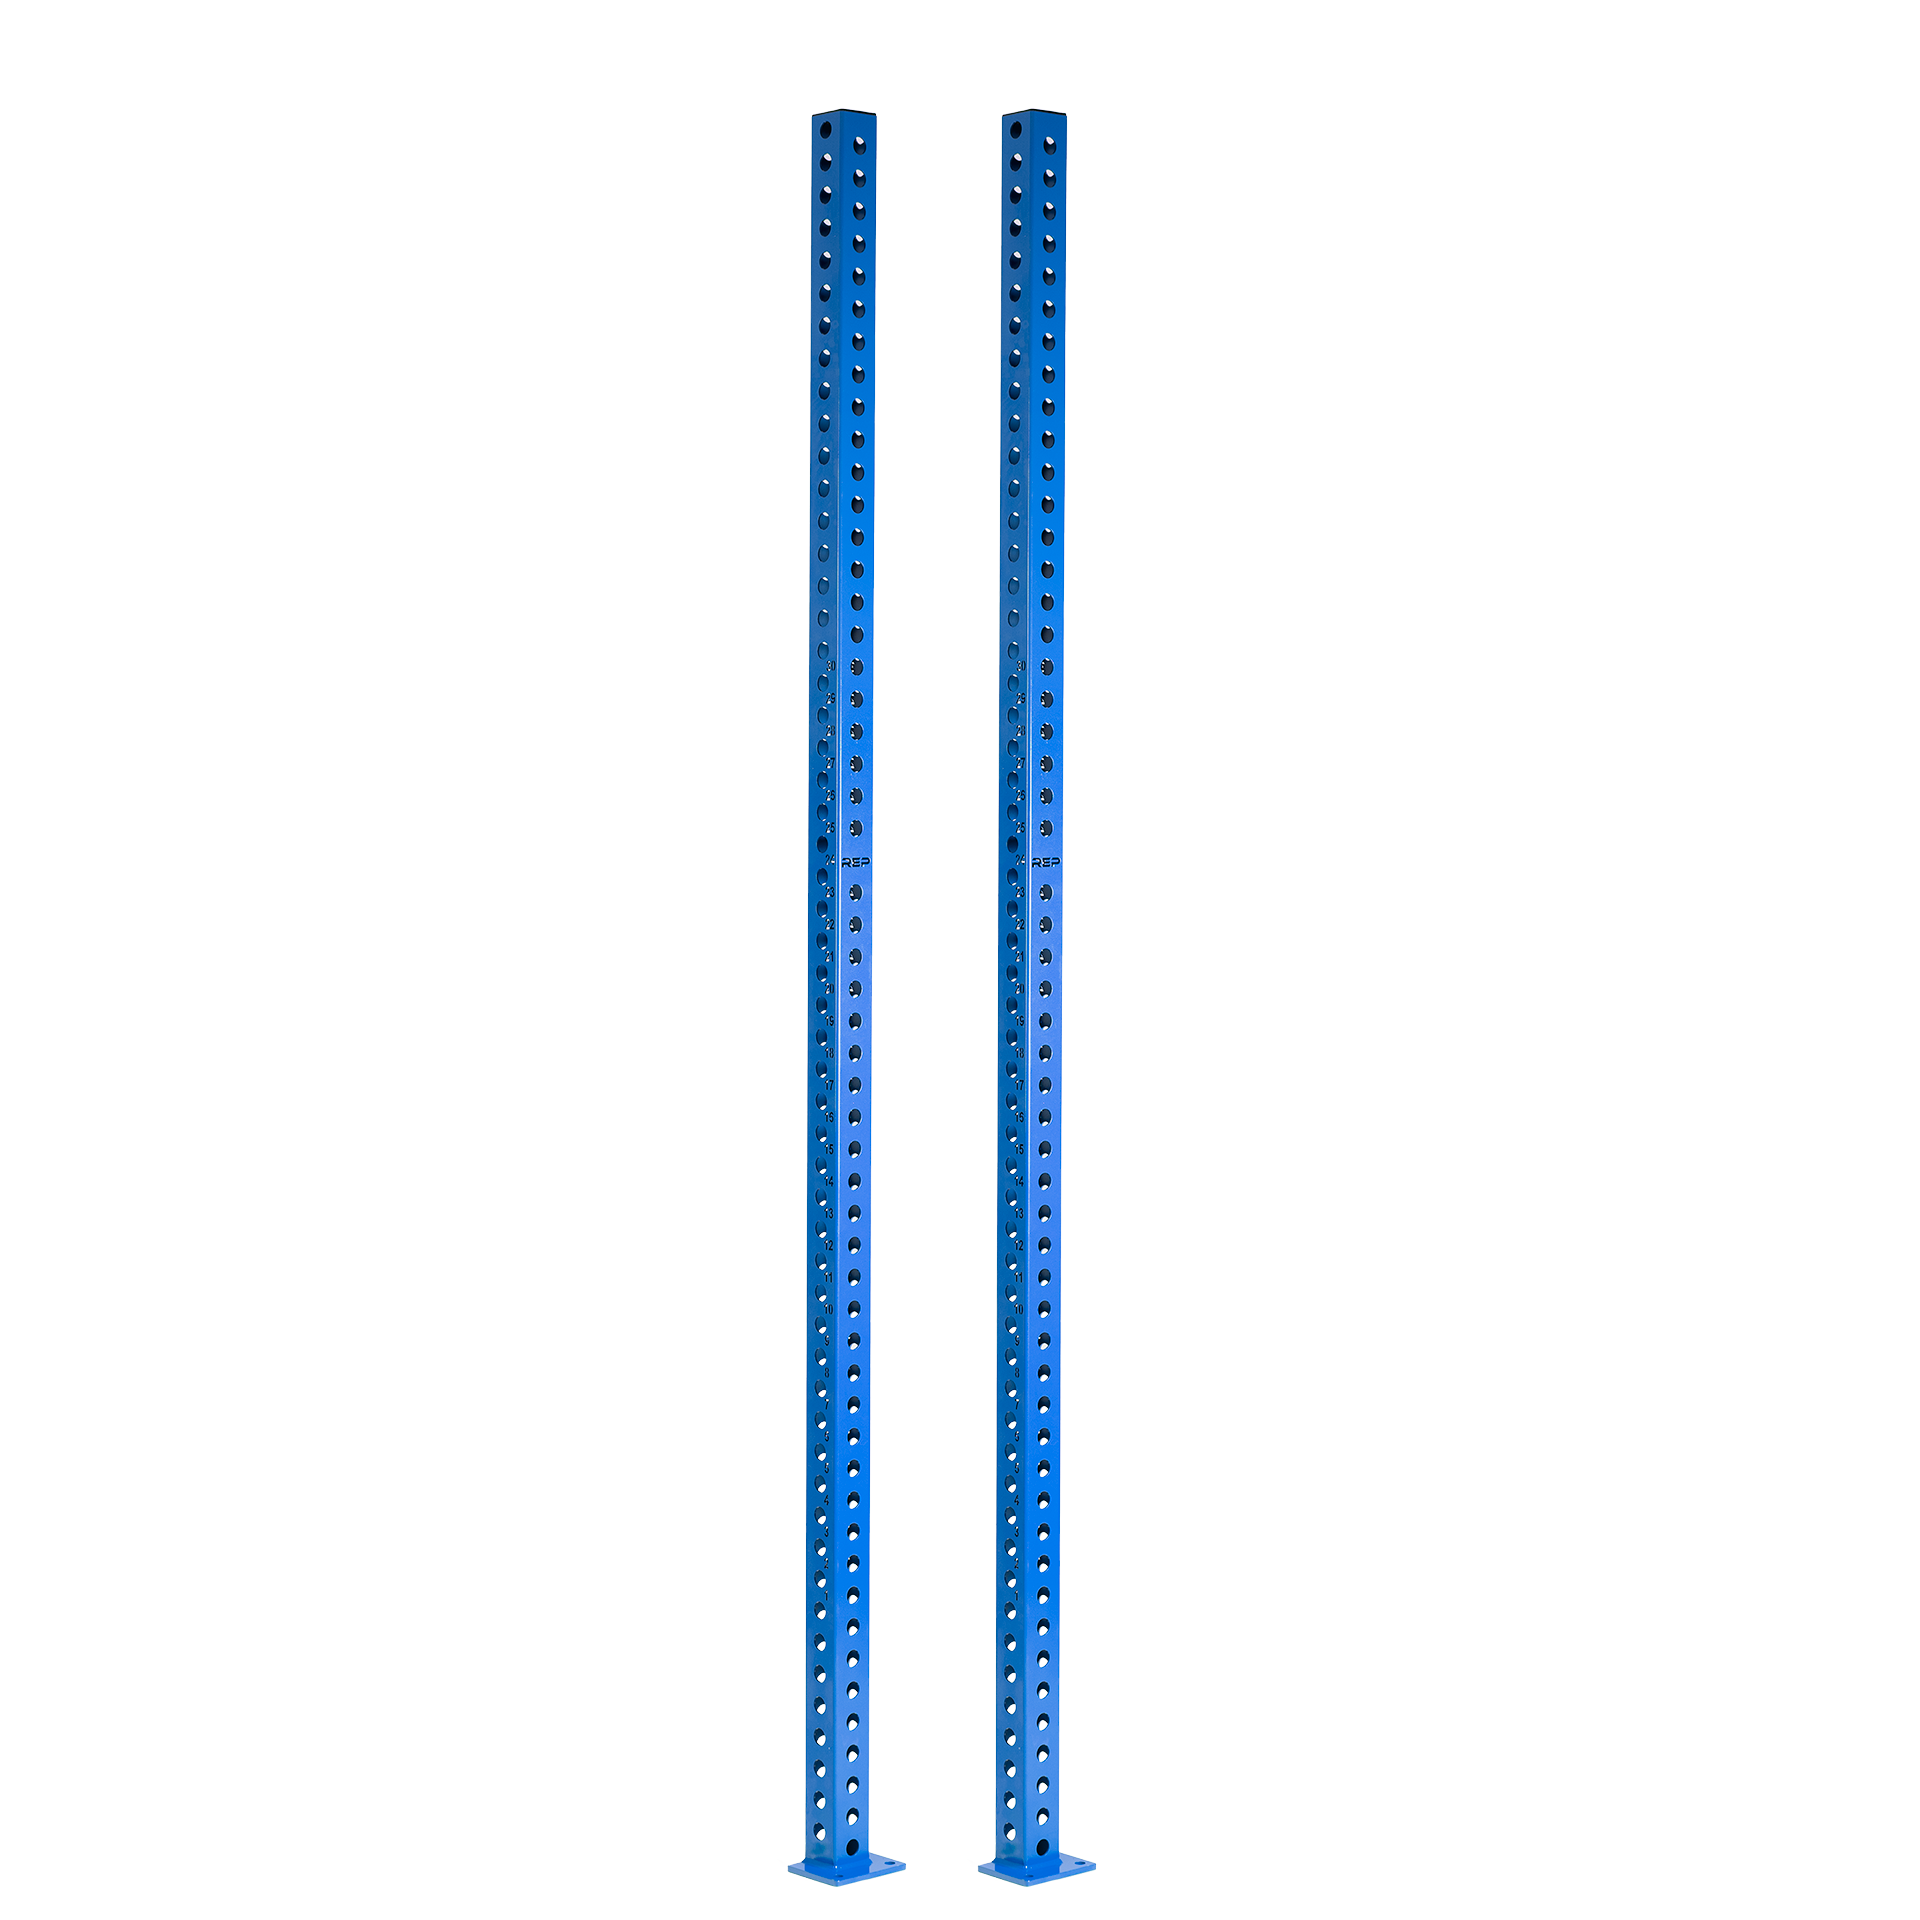 Rig Uprights - 5000 / Pair / Blue